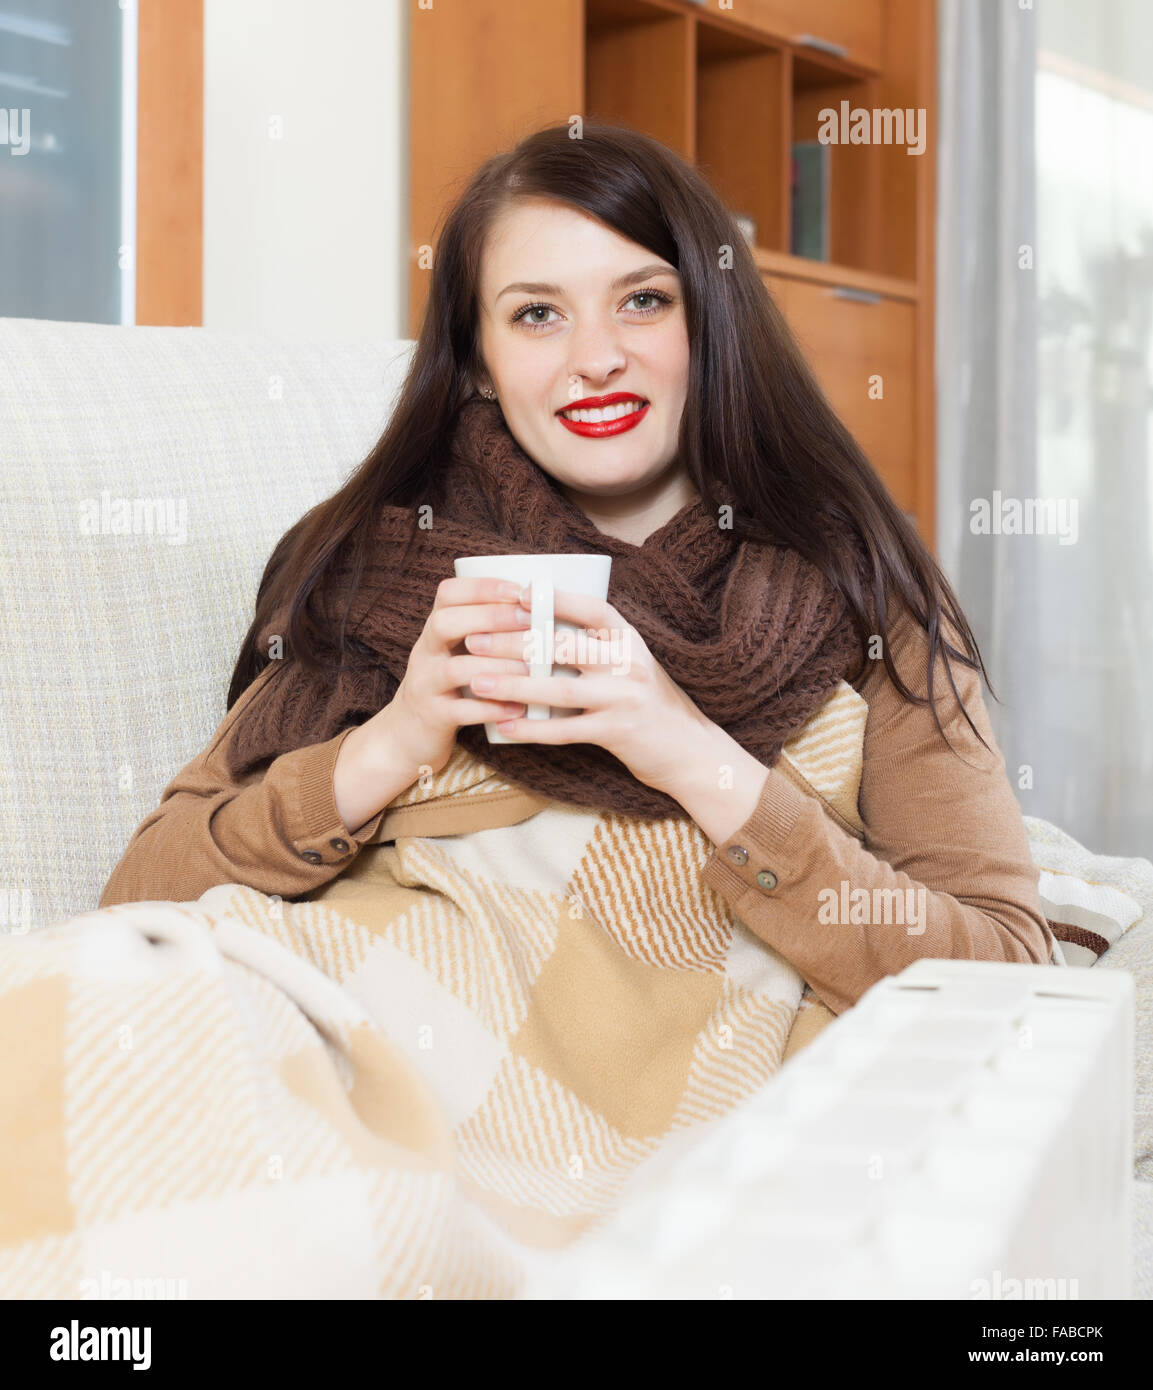 girl with cup near electric heater in home Stock Photo